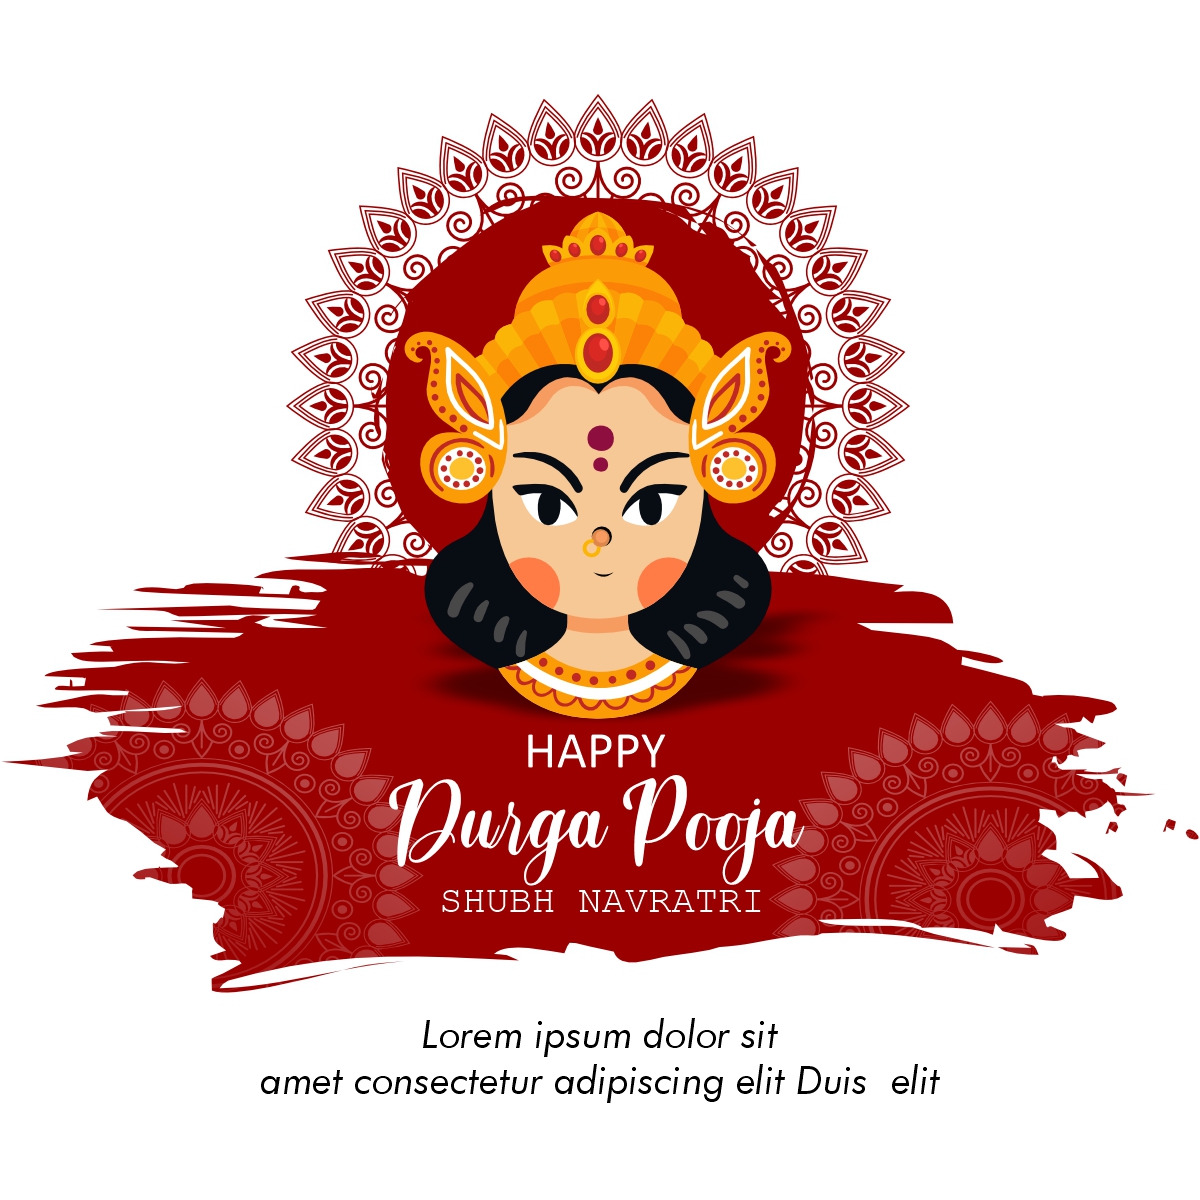 Download Happy Durga Pooja Shubh Navratri Download Free From ...